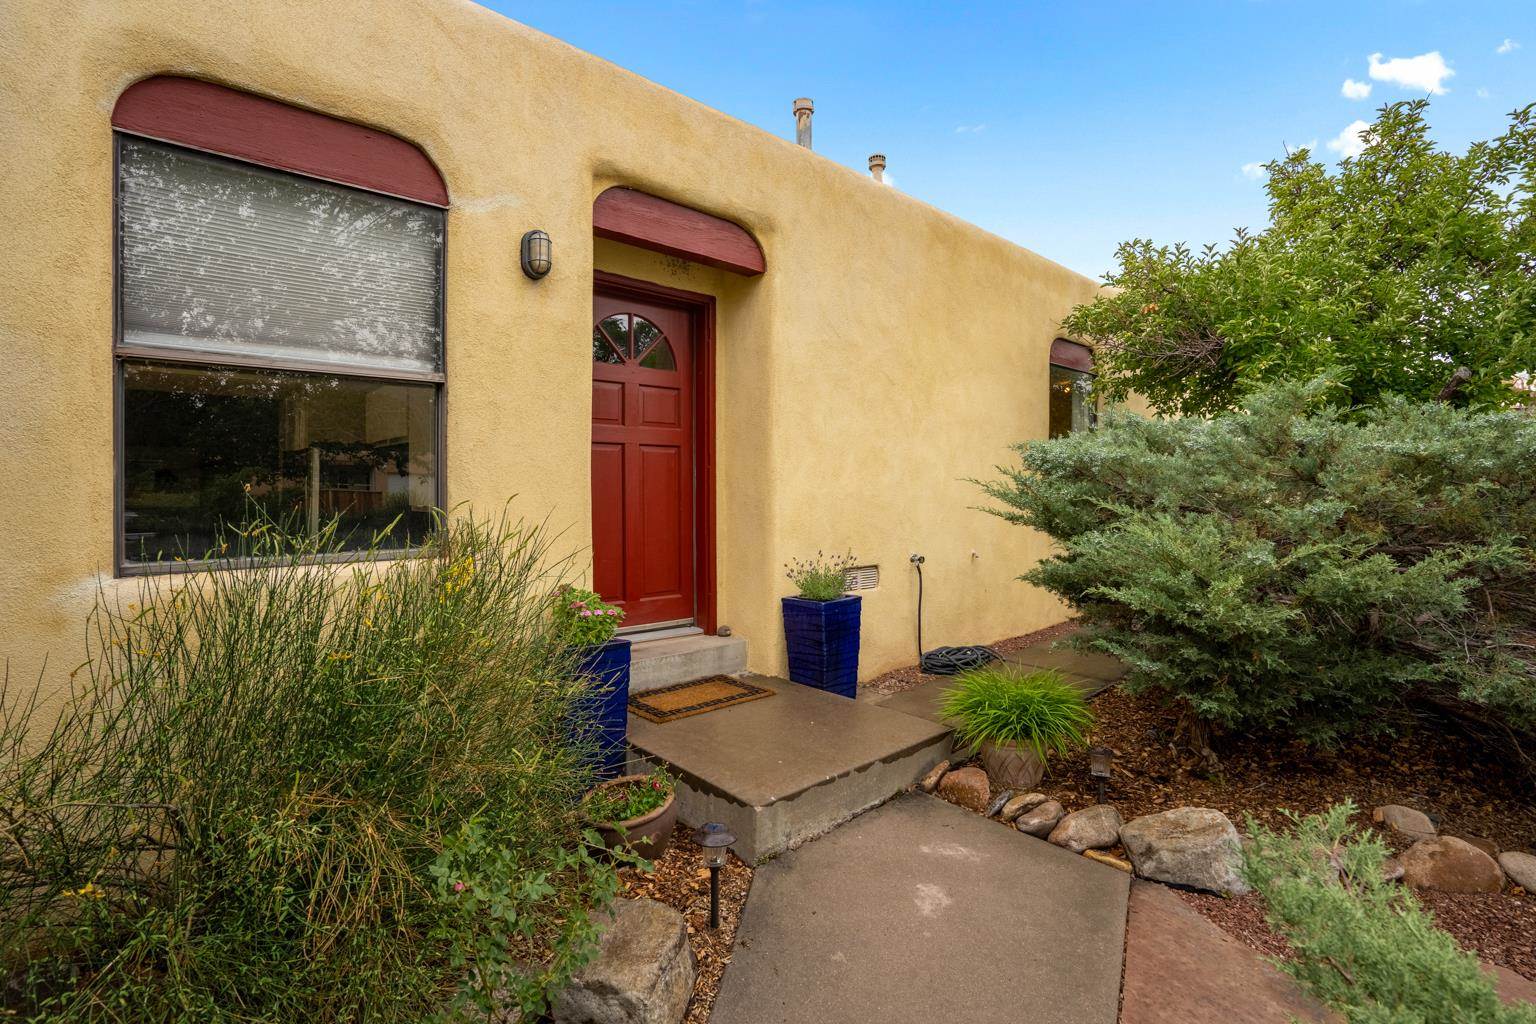 110 Calle Don Jose, Santa Fe, New Mexico 87501, 3 Bedrooms Bedrooms, ,2 BathroomsBathrooms,Residential,For Sale,110 Calle Don Jose,202102910